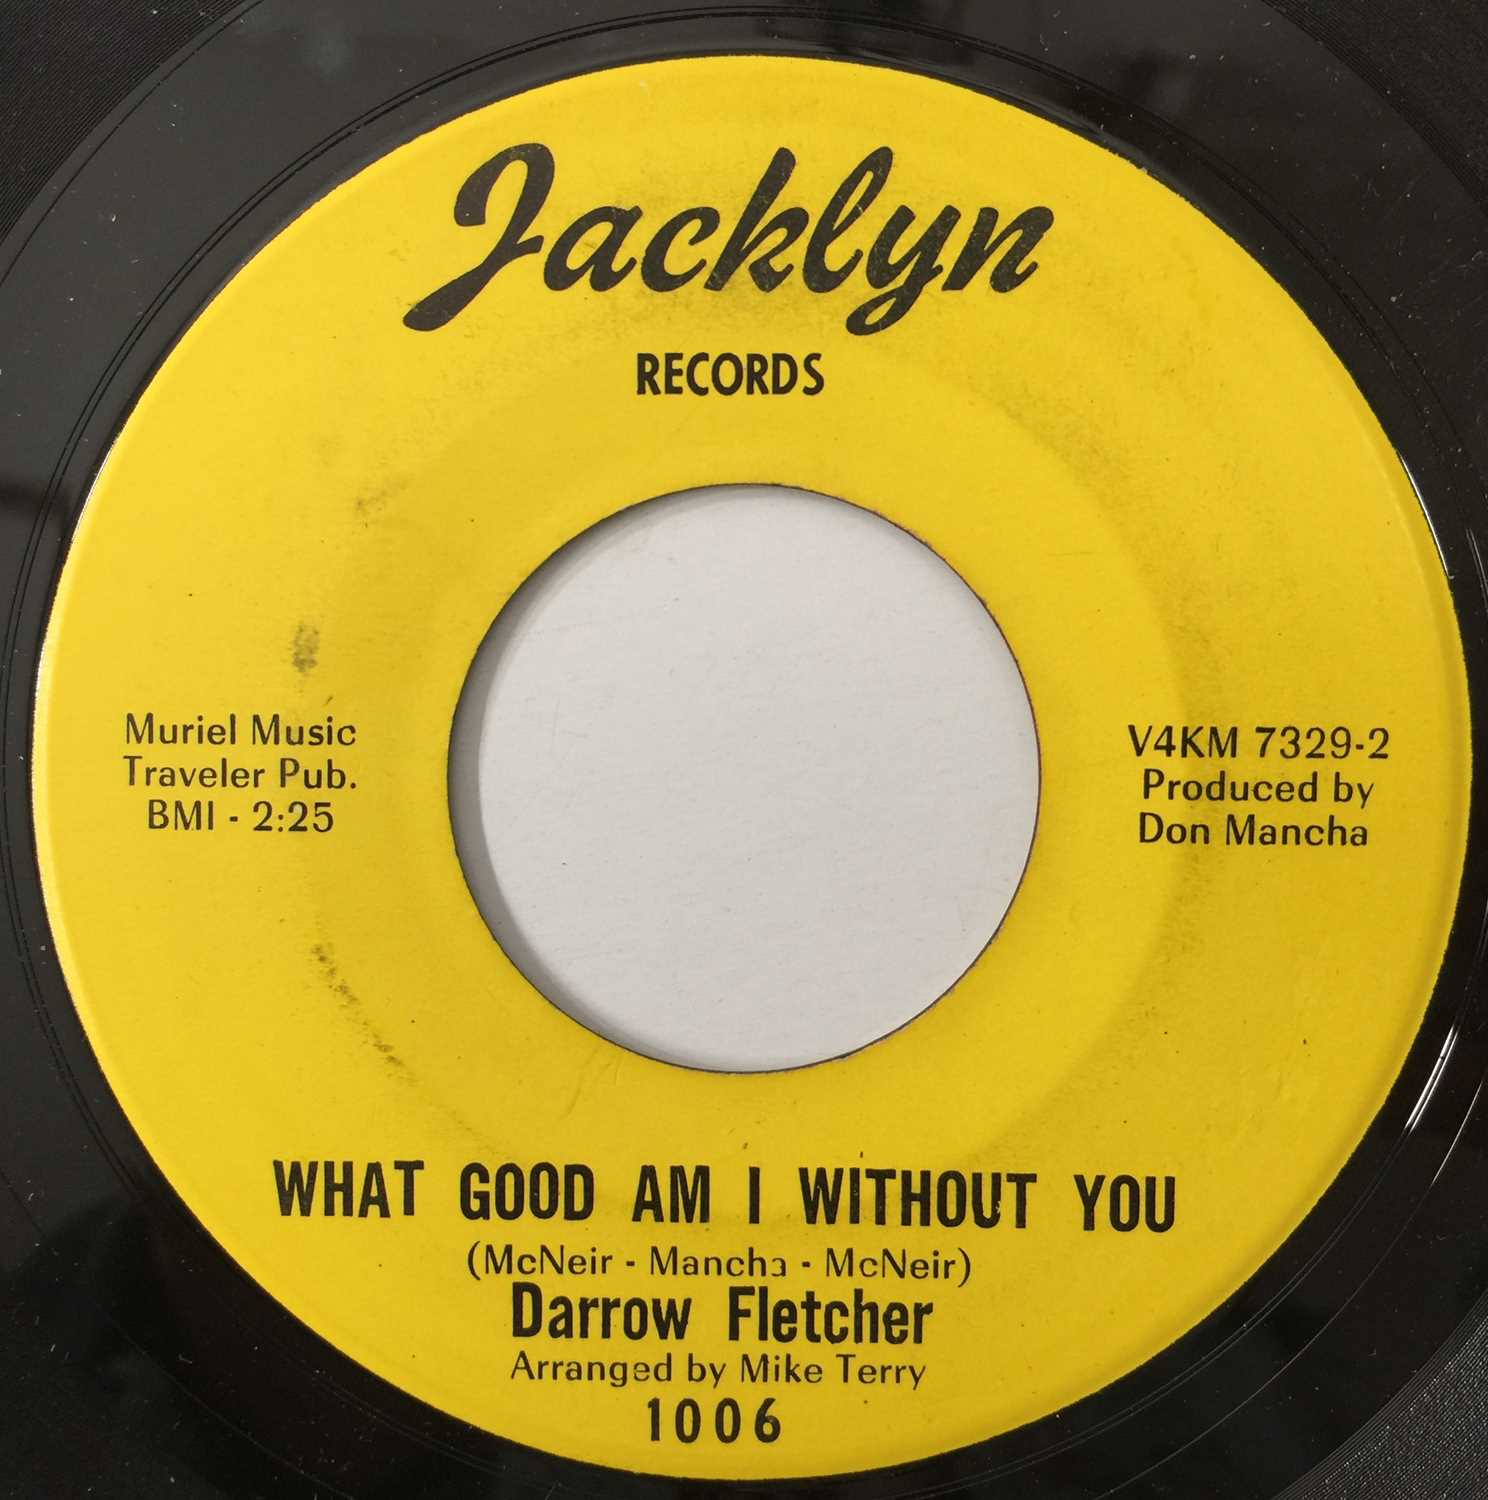 DARROW FLETCHER - WHAT GOOD AM I WITHOUT YOU 7" (US STOCK - JACKLYN RECORDS - 1006)